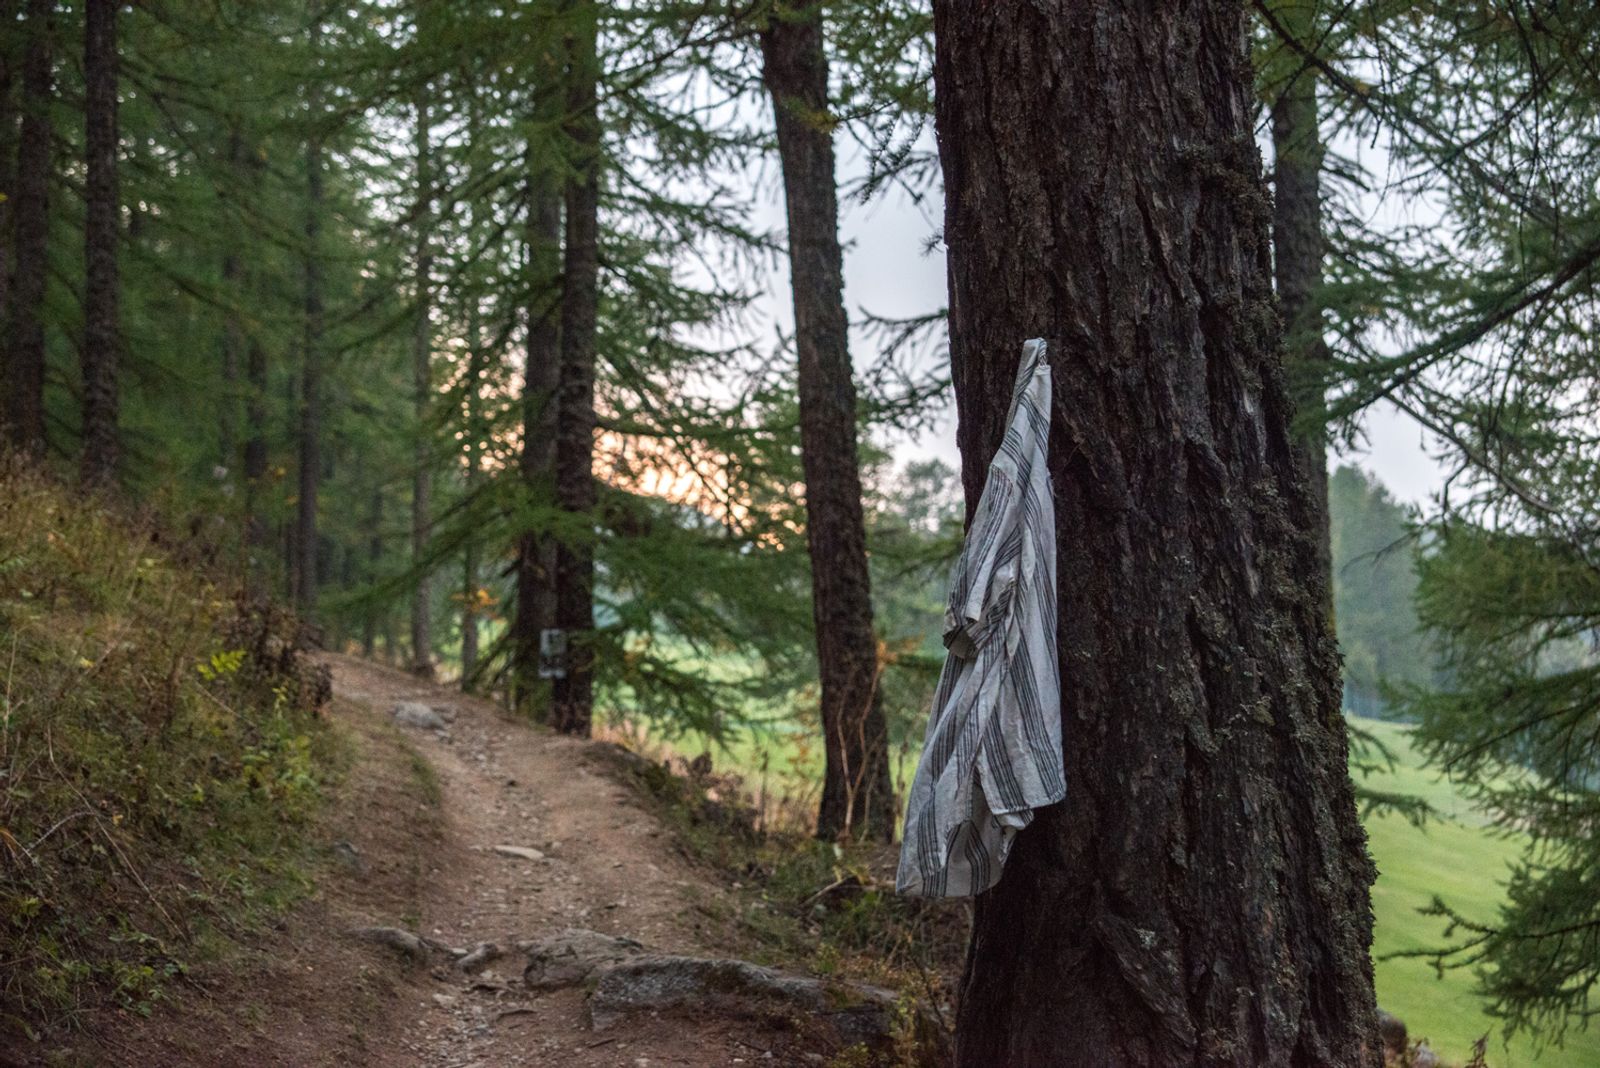 © Rose Lecat - A shirt hangs from a branch of a tree on the path of crossing the Alps. Montgenèvre, Italie-France border, October 5, 2018.